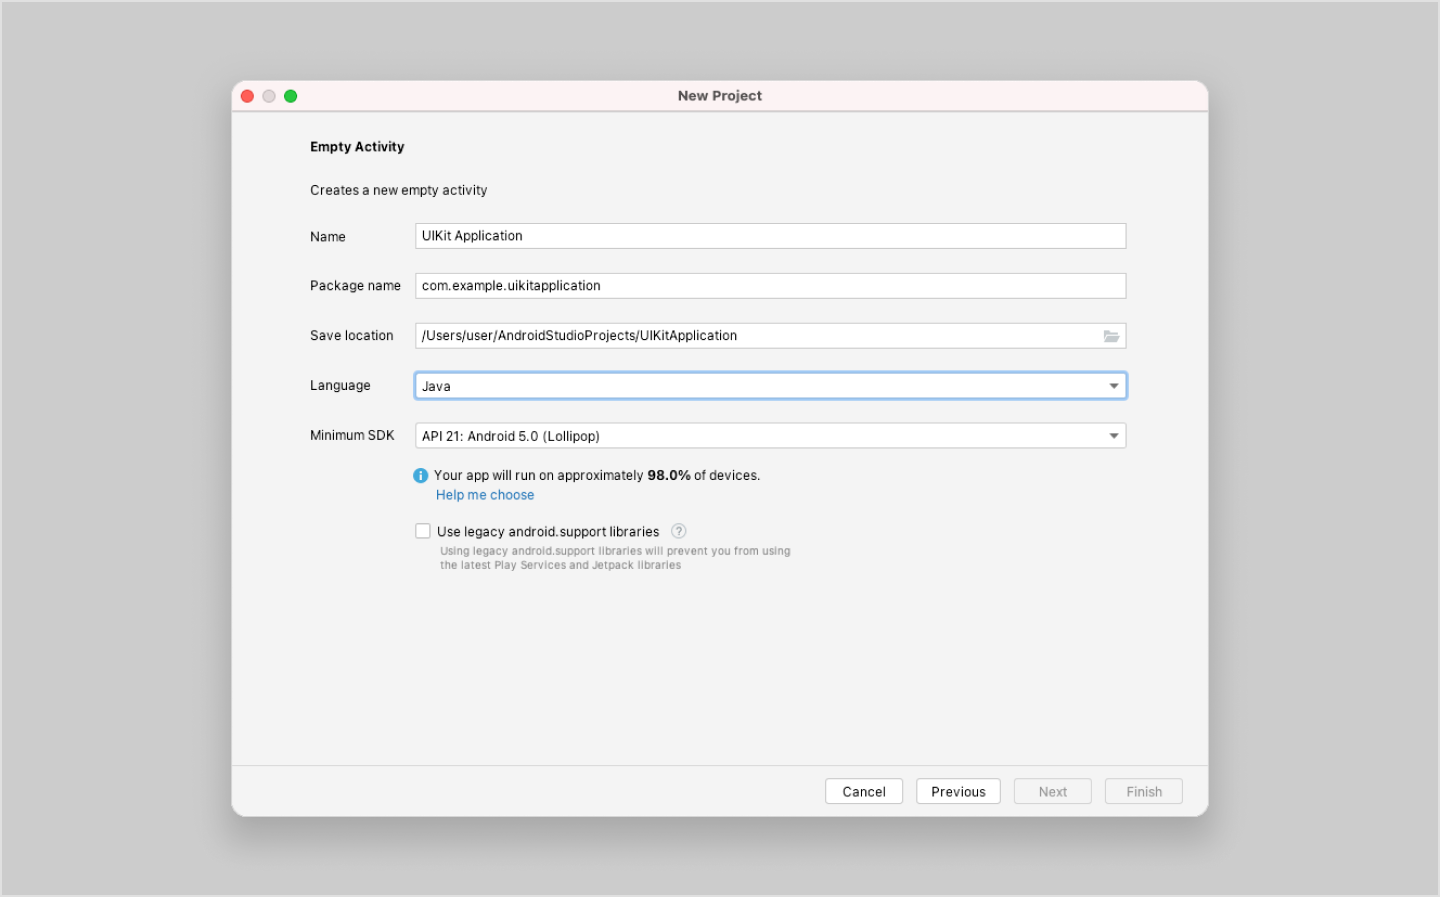 Image|Setting up your project in the Create new project dialog.